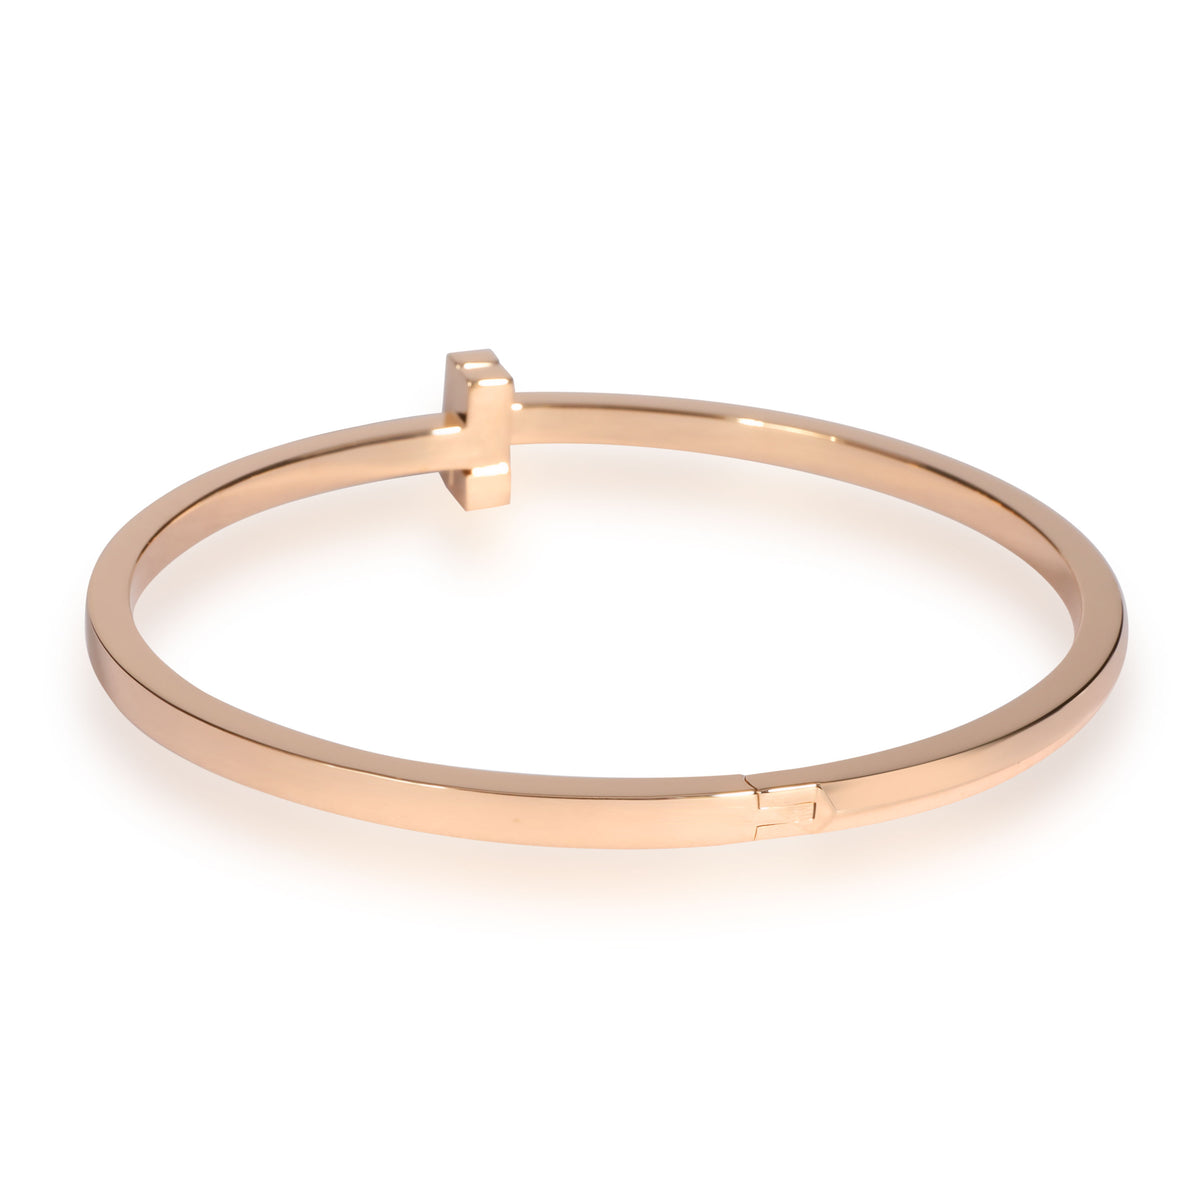 Tiffany & Co. T1 Hinged Bangle in 18KT Rose Gold